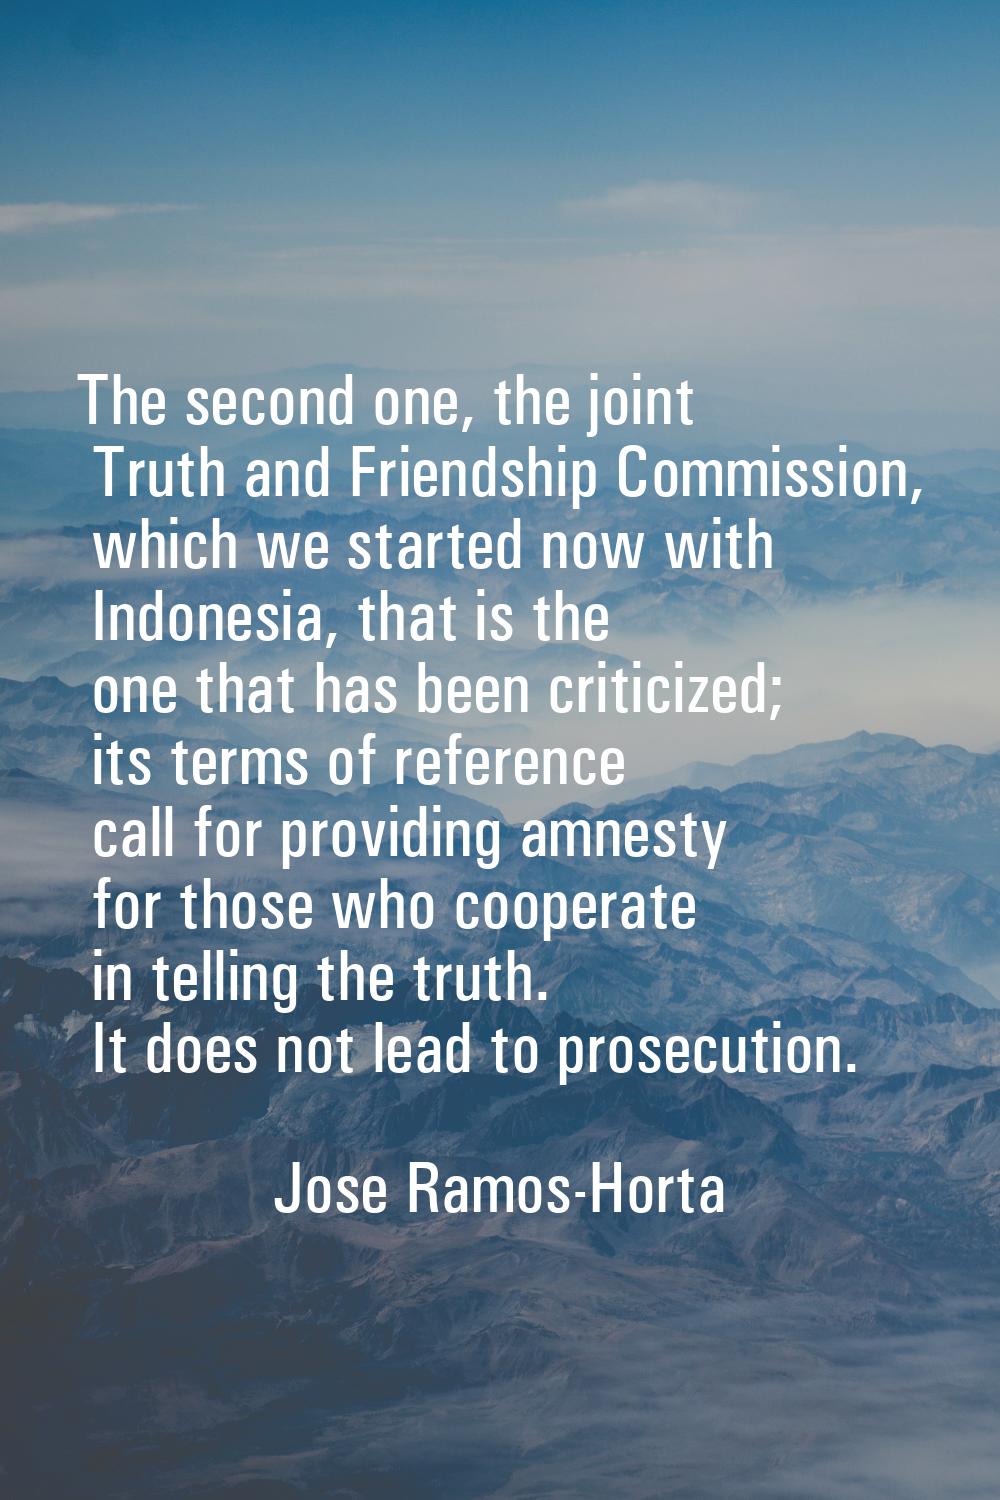 The second one, the joint Truth and Friendship Commission, which we started now with Indonesia, tha